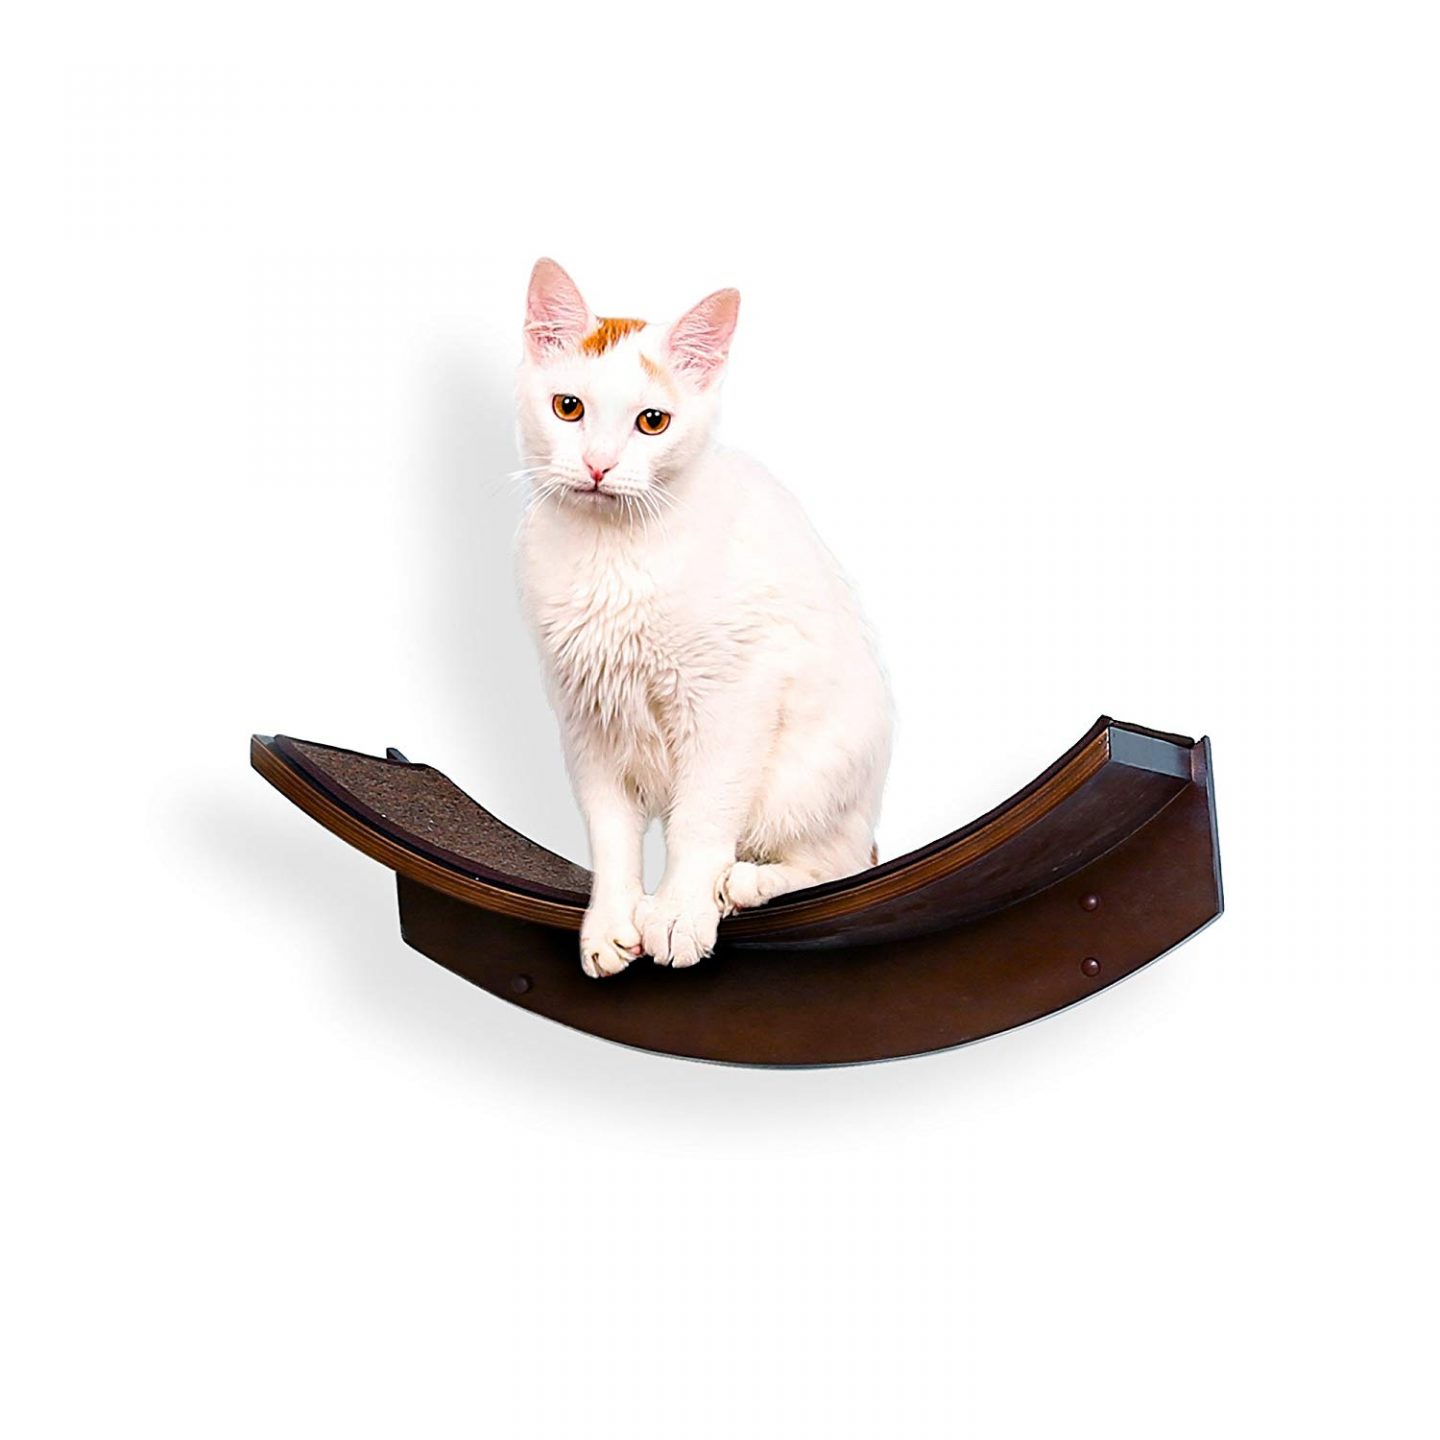 Curved Mahogany Cat Shelf With Replaceable Carpet - Finally a wall mounted cat perch that's easy to clean! But if a cat perch with pretty silk leaves or a stylish wall mounted cat hammock is more your style check out the PICTURES in this post for them too.